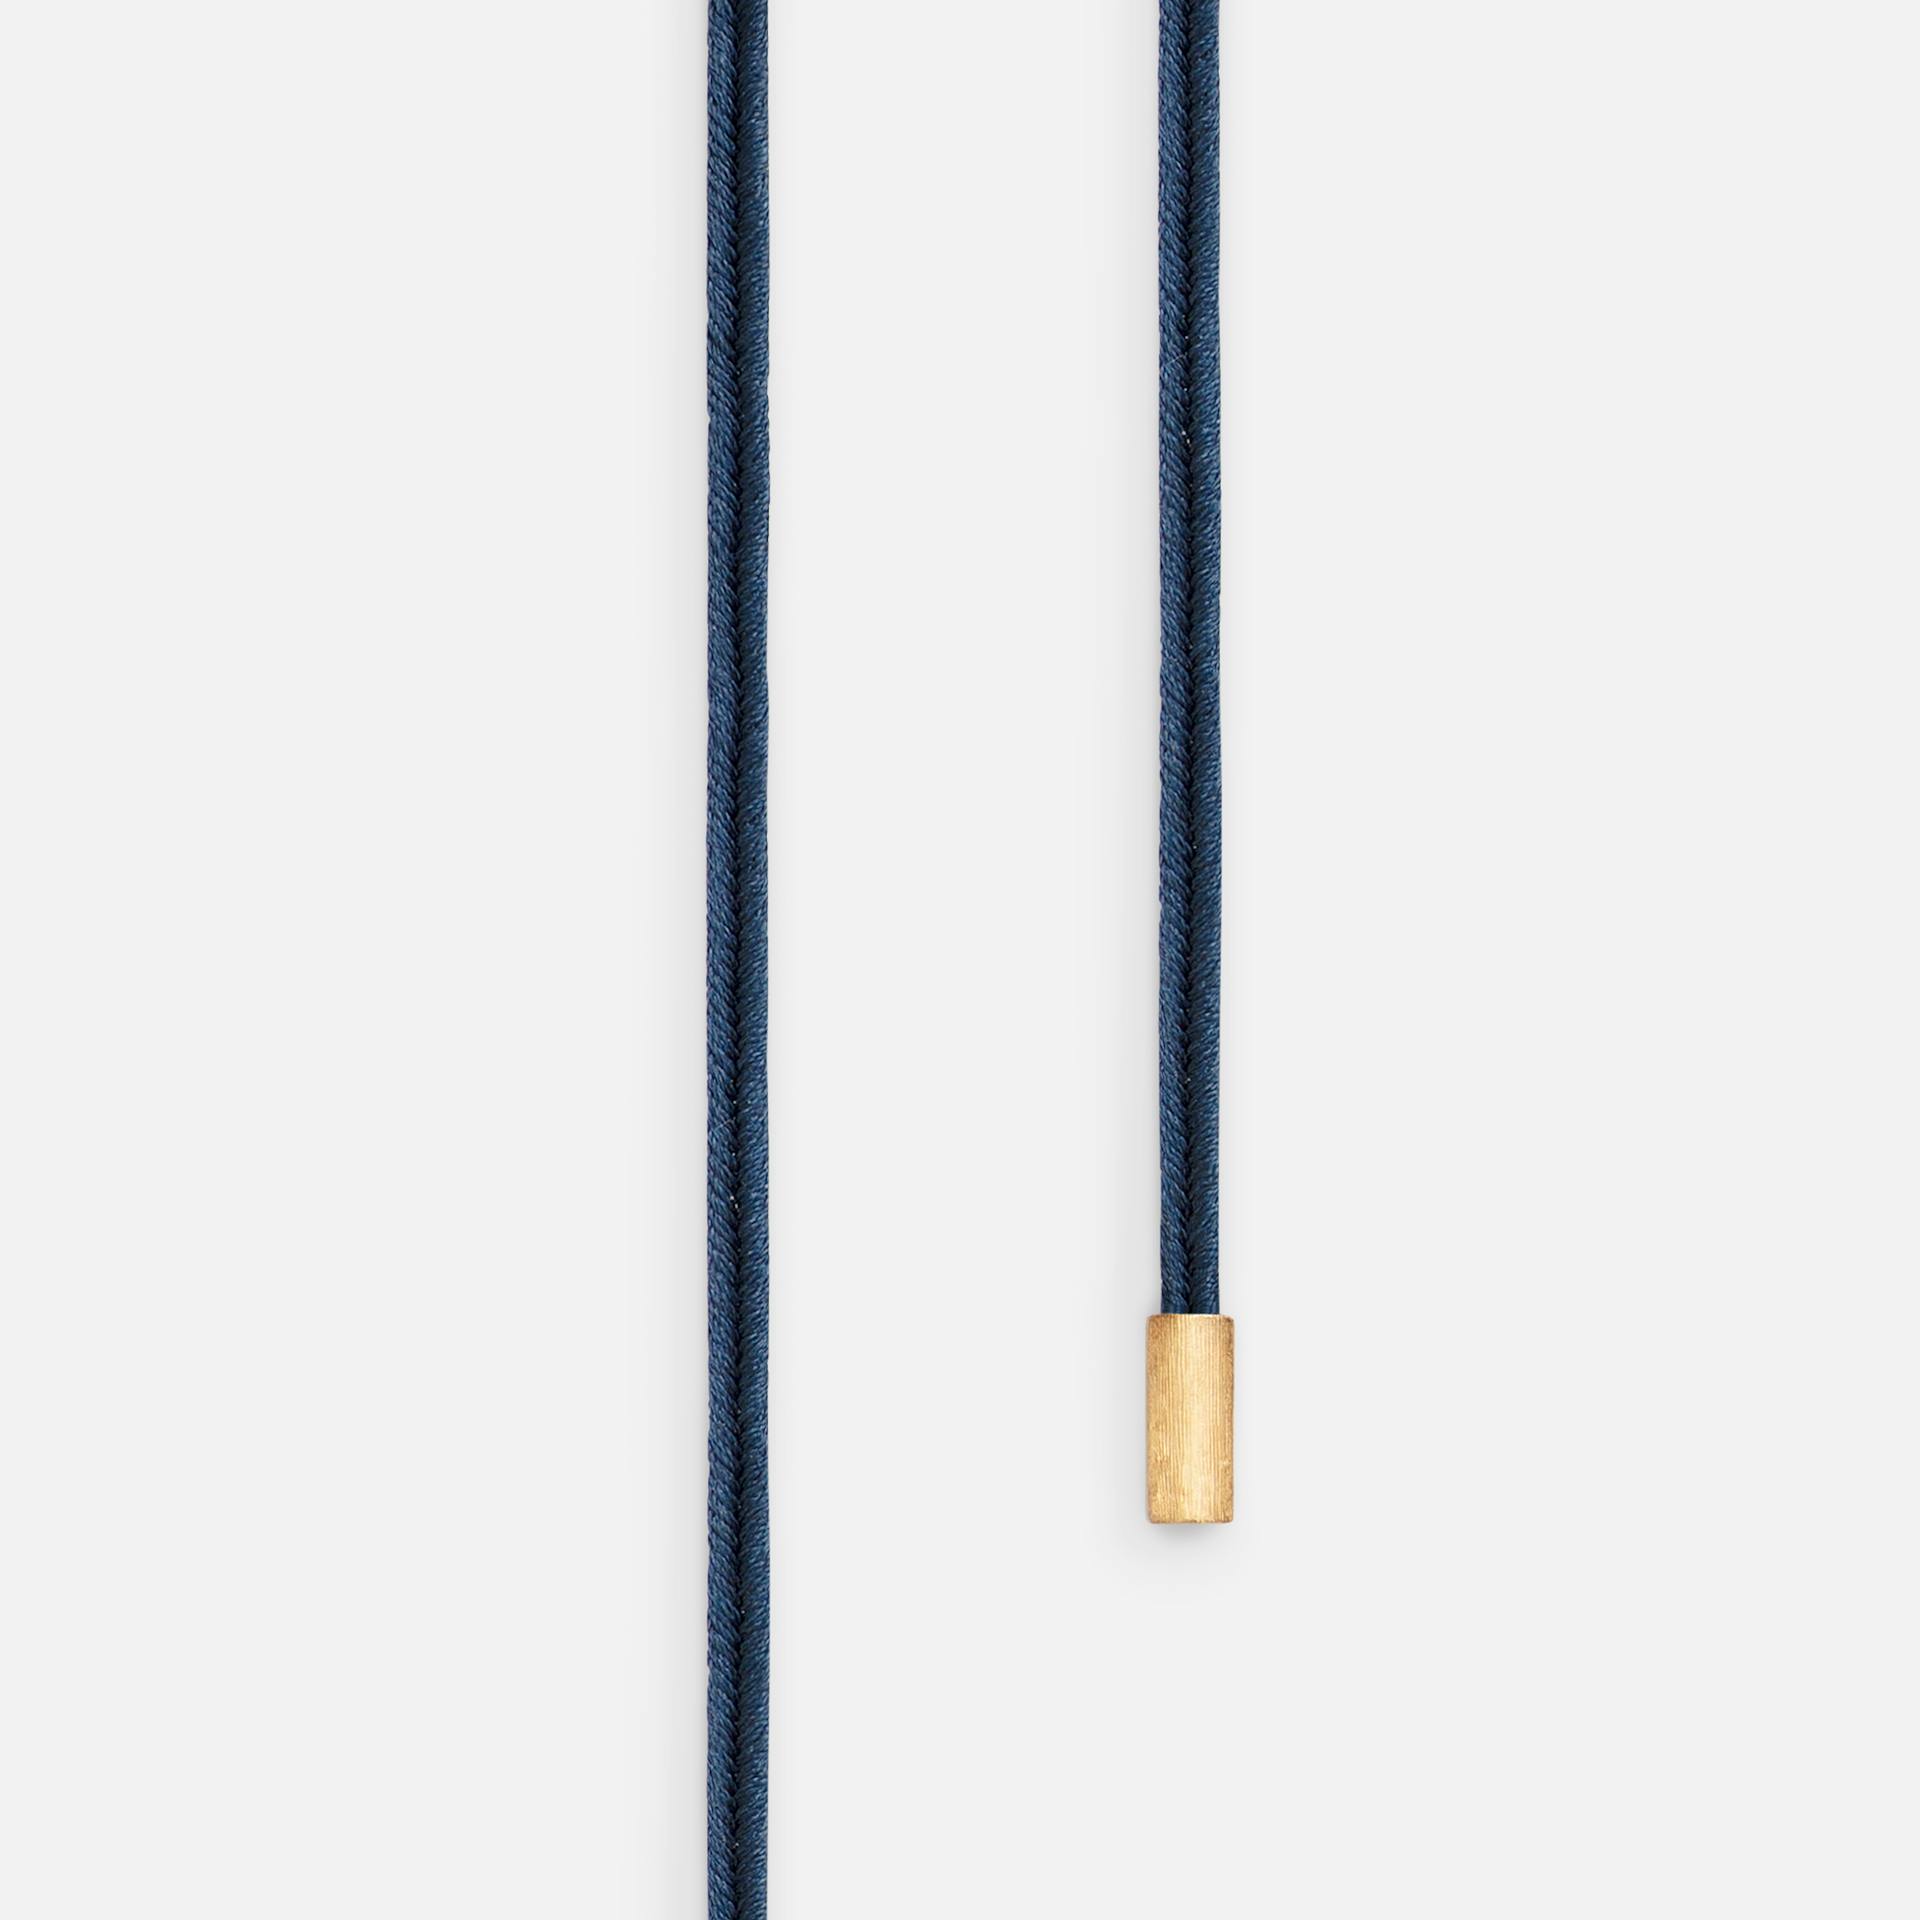 Necklace string Blue Design string with end pieces in 18k gold